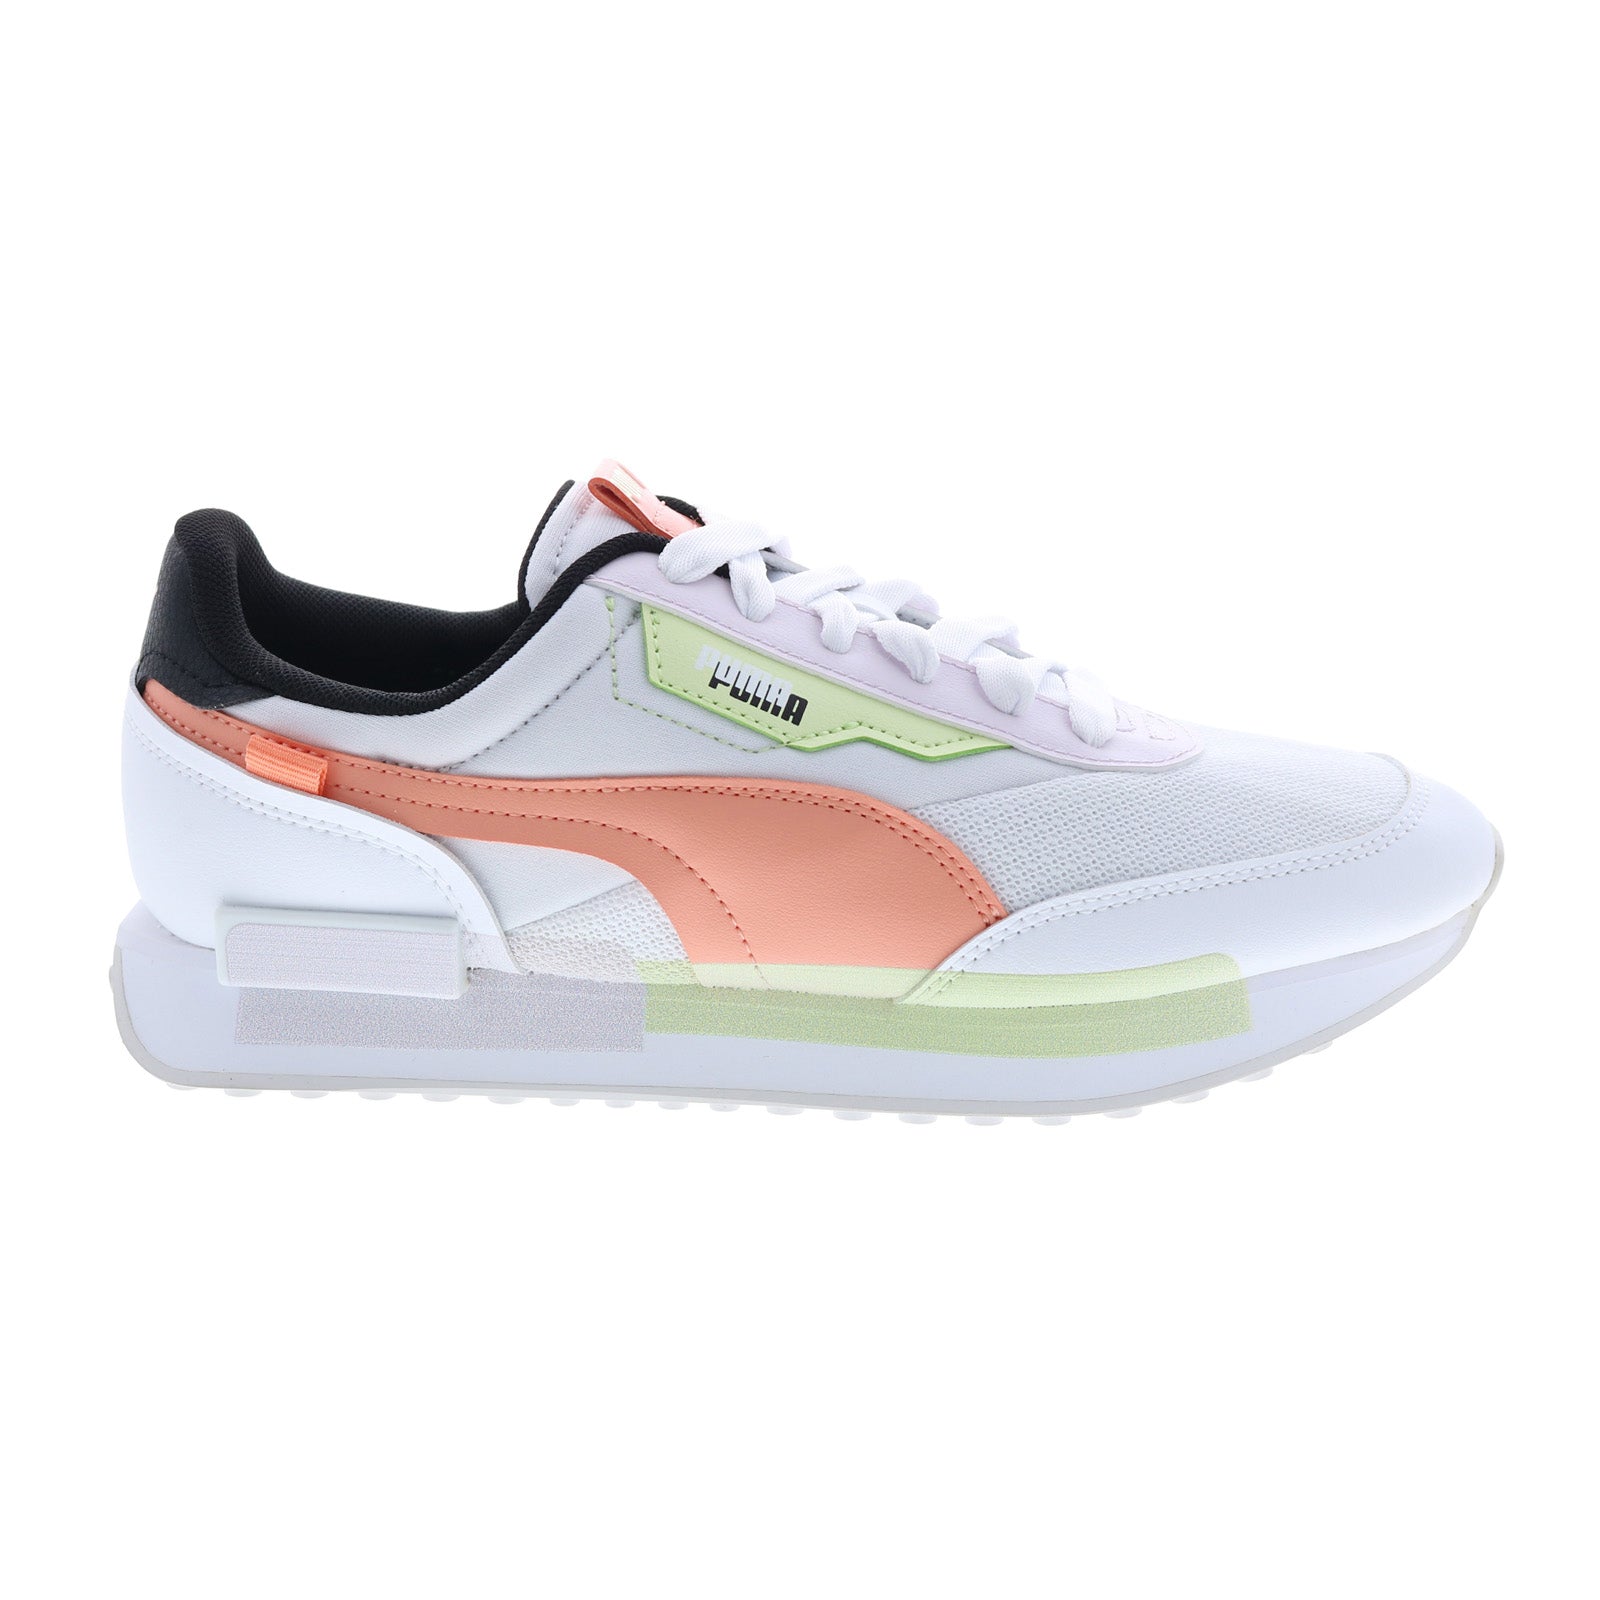 vroegrijp versneller uitsterven Puma Future Rider Mis 38486001 Womens White Leather Lifestyle Sneakers -  Ruze Shoes